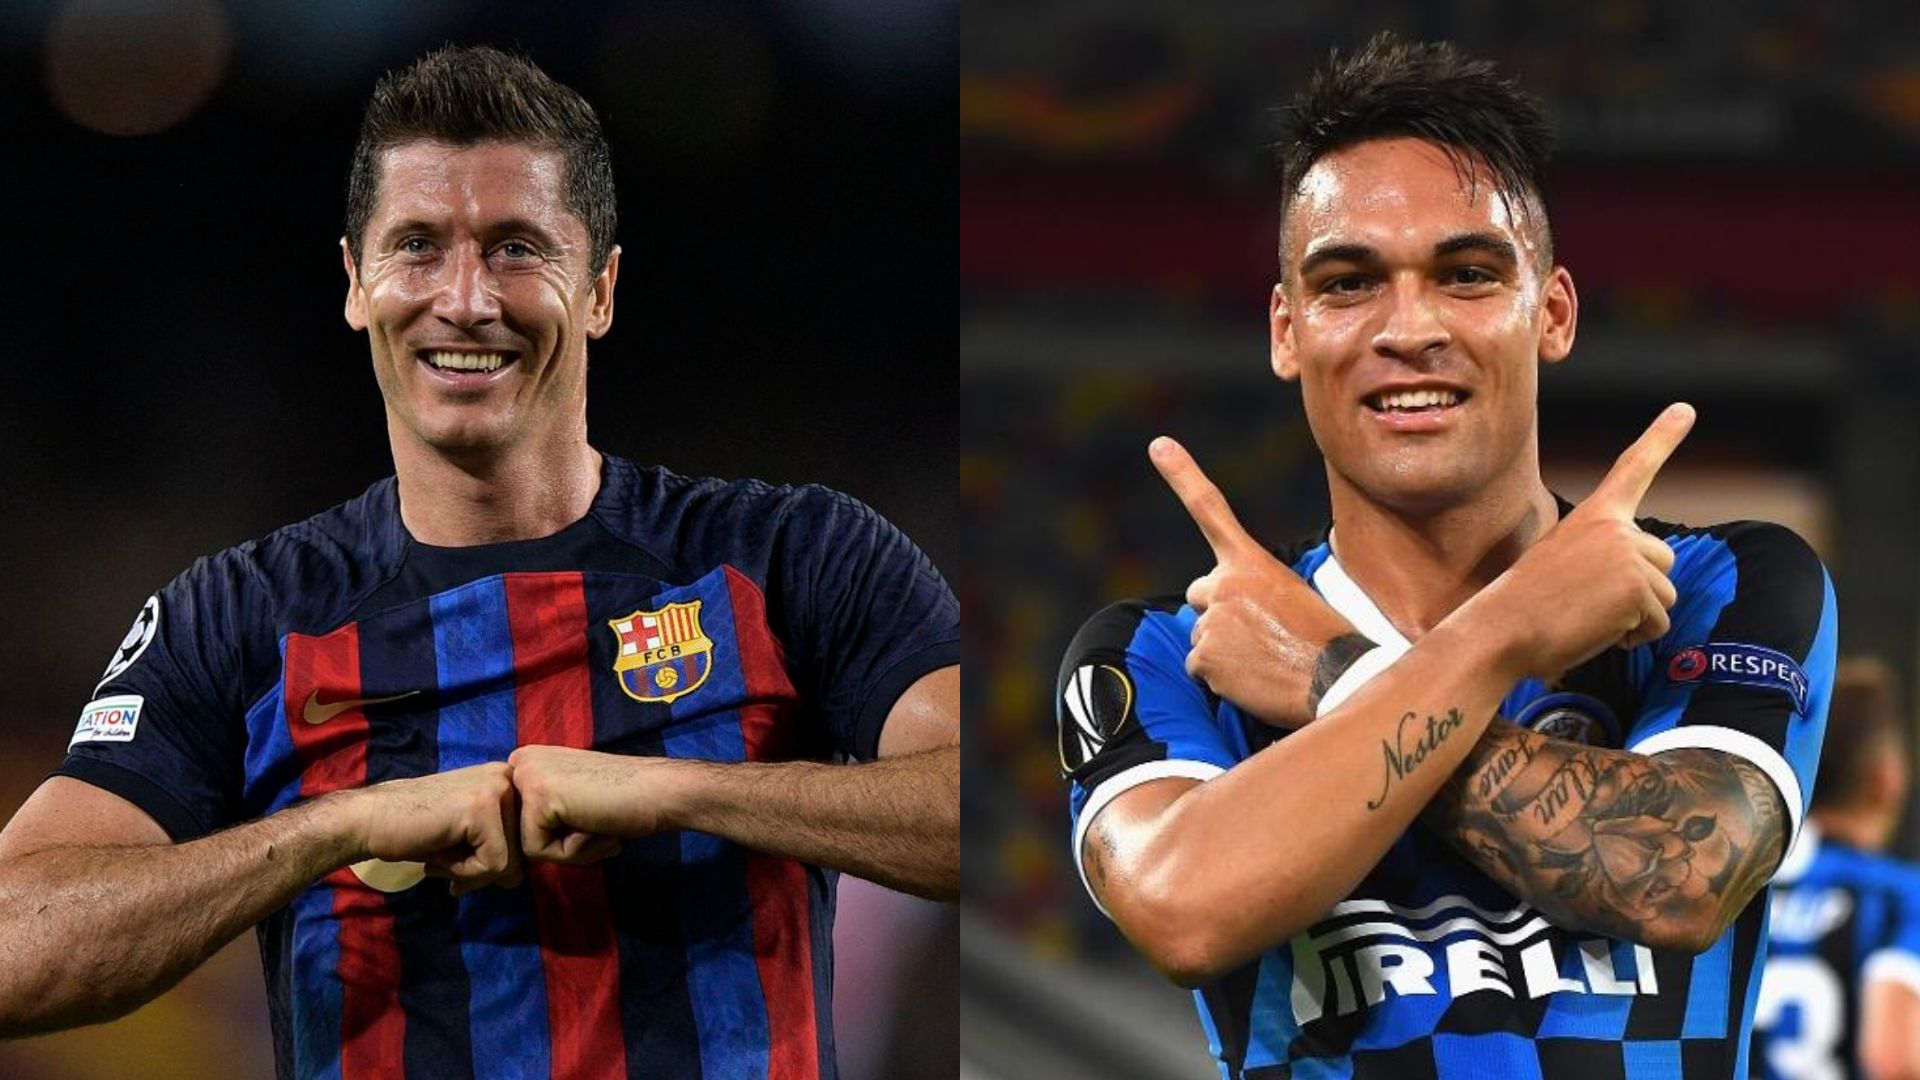 Barcelona collides with Inter Milan for the group stage of the Champions League.